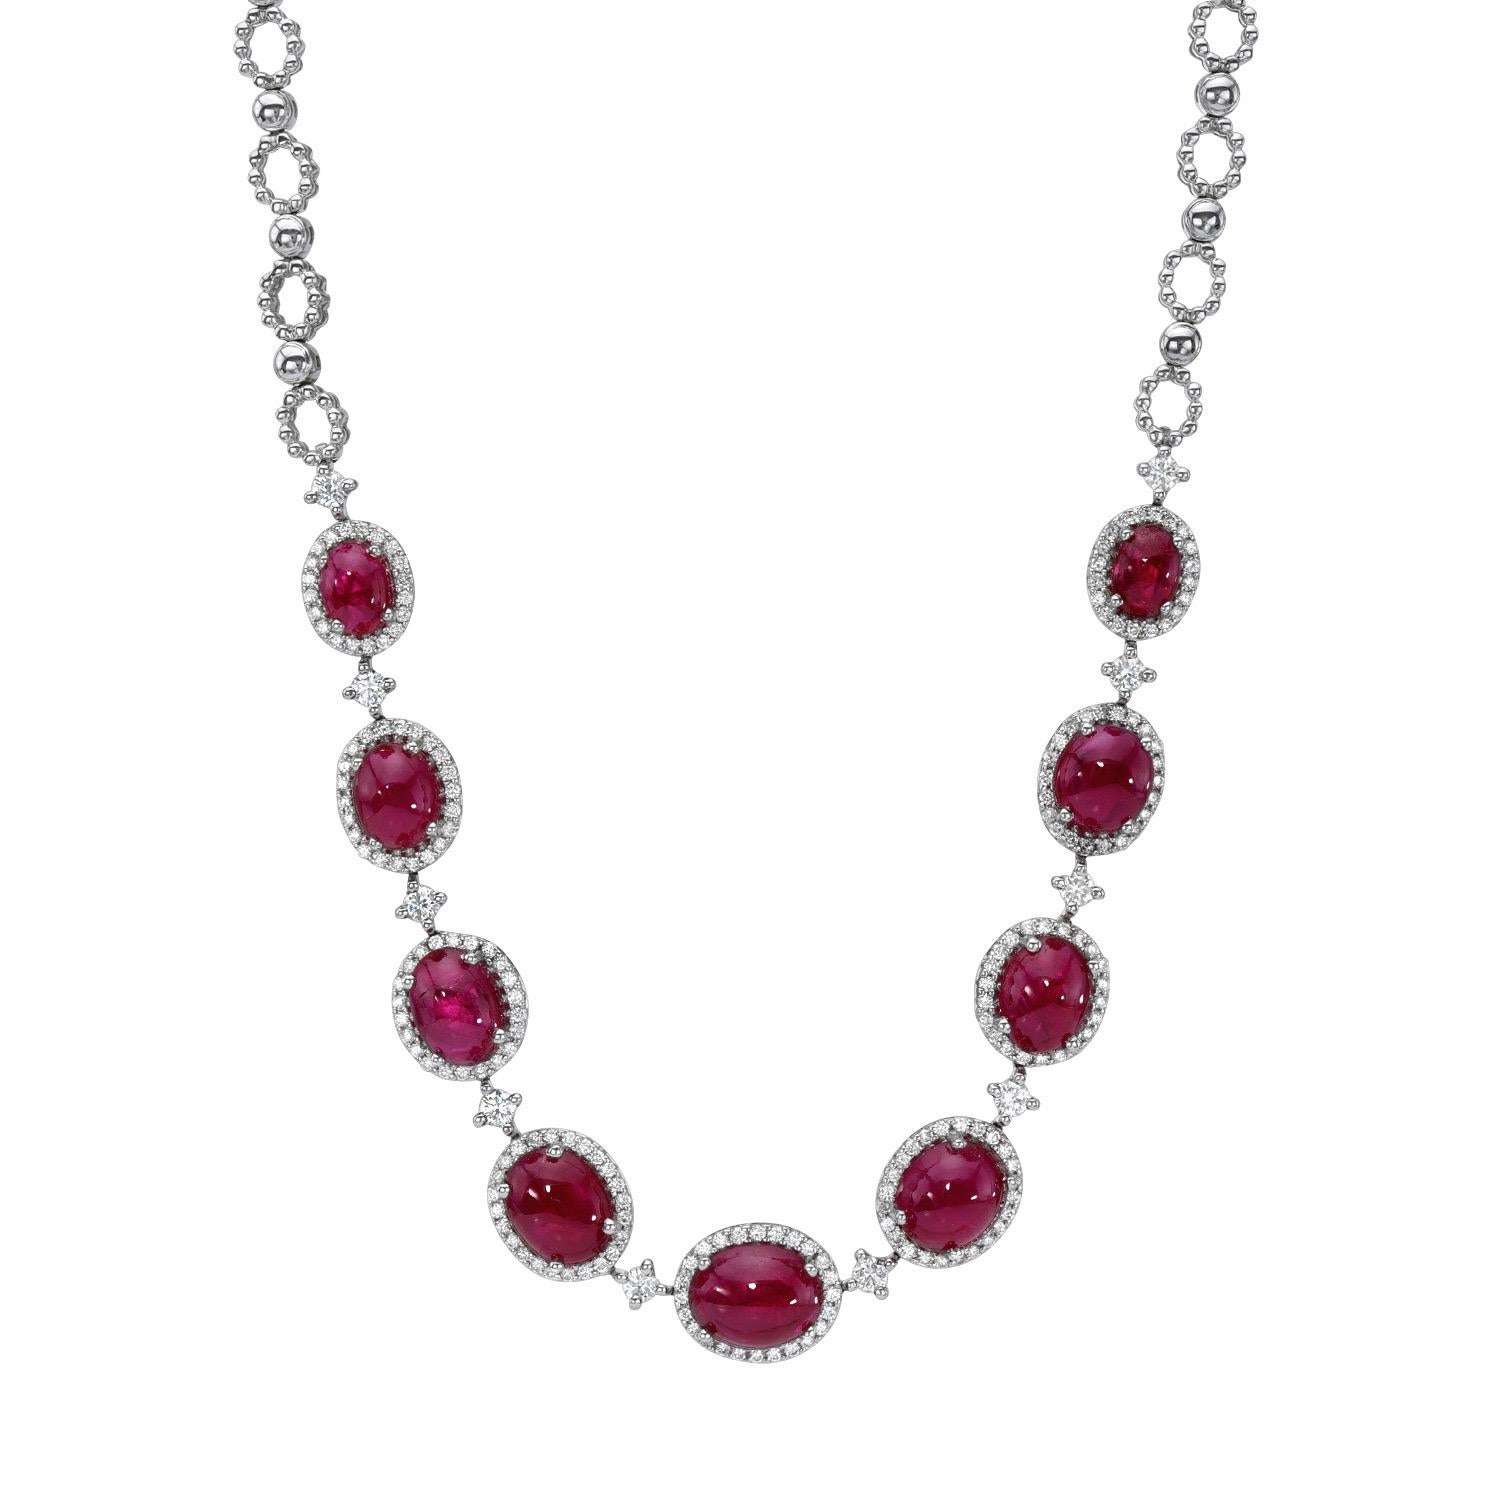 18K White gold necklace set with a total of 19.48 carat Ruby Cabochon ovals and a total of 1.86 carat diamonds. 
Length - 17” inches. 
Returns are accepted and paid by us within 7 days of delivery. 

Please FOLLOW the MERKABA storefront to be the